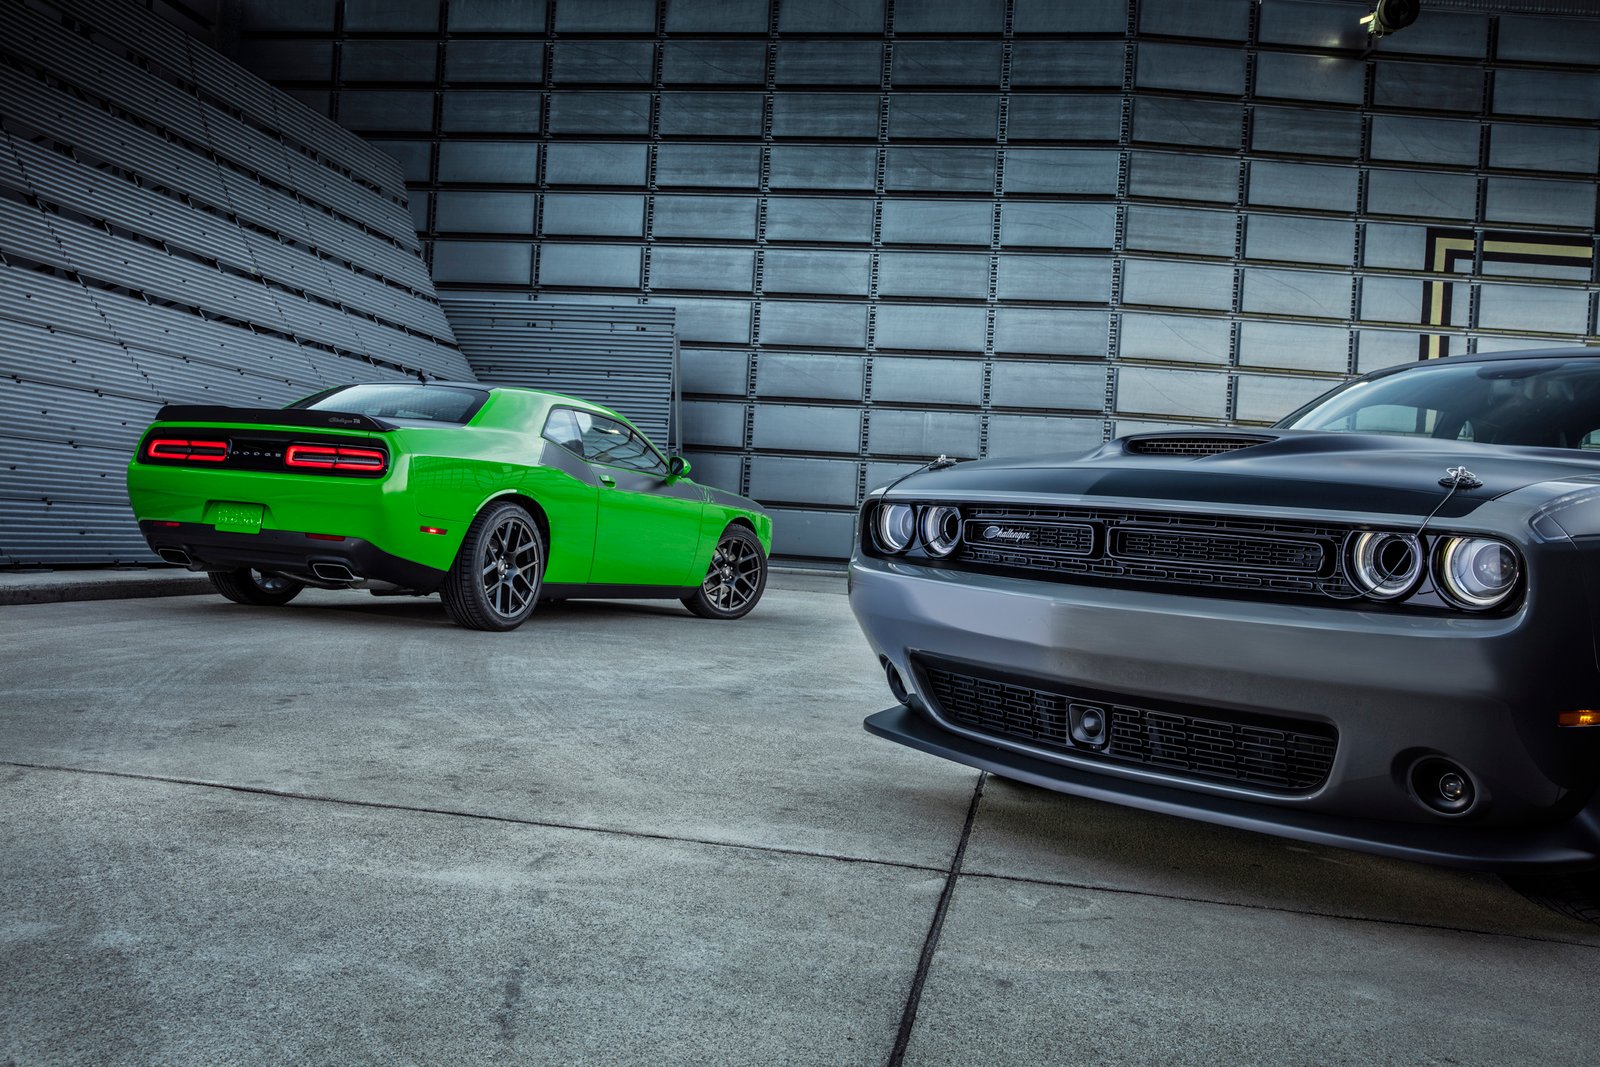 2017 Dodge Challenger T/A 392 (foreground) and 2017 Dodge Challe